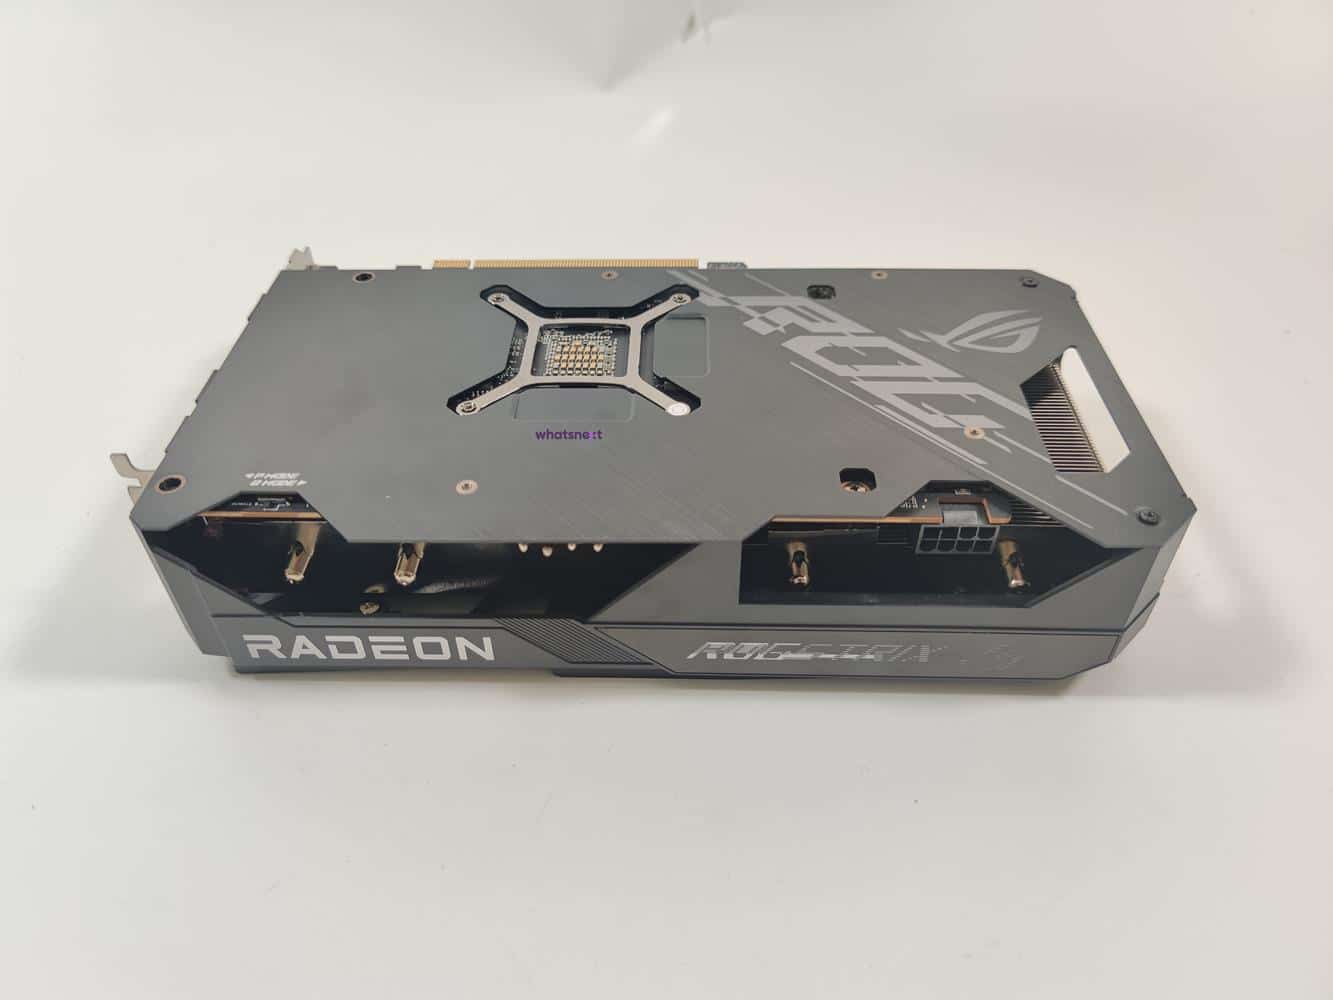 Radeon RX 6500 XT and Radeon RX 6400 release dates revealed